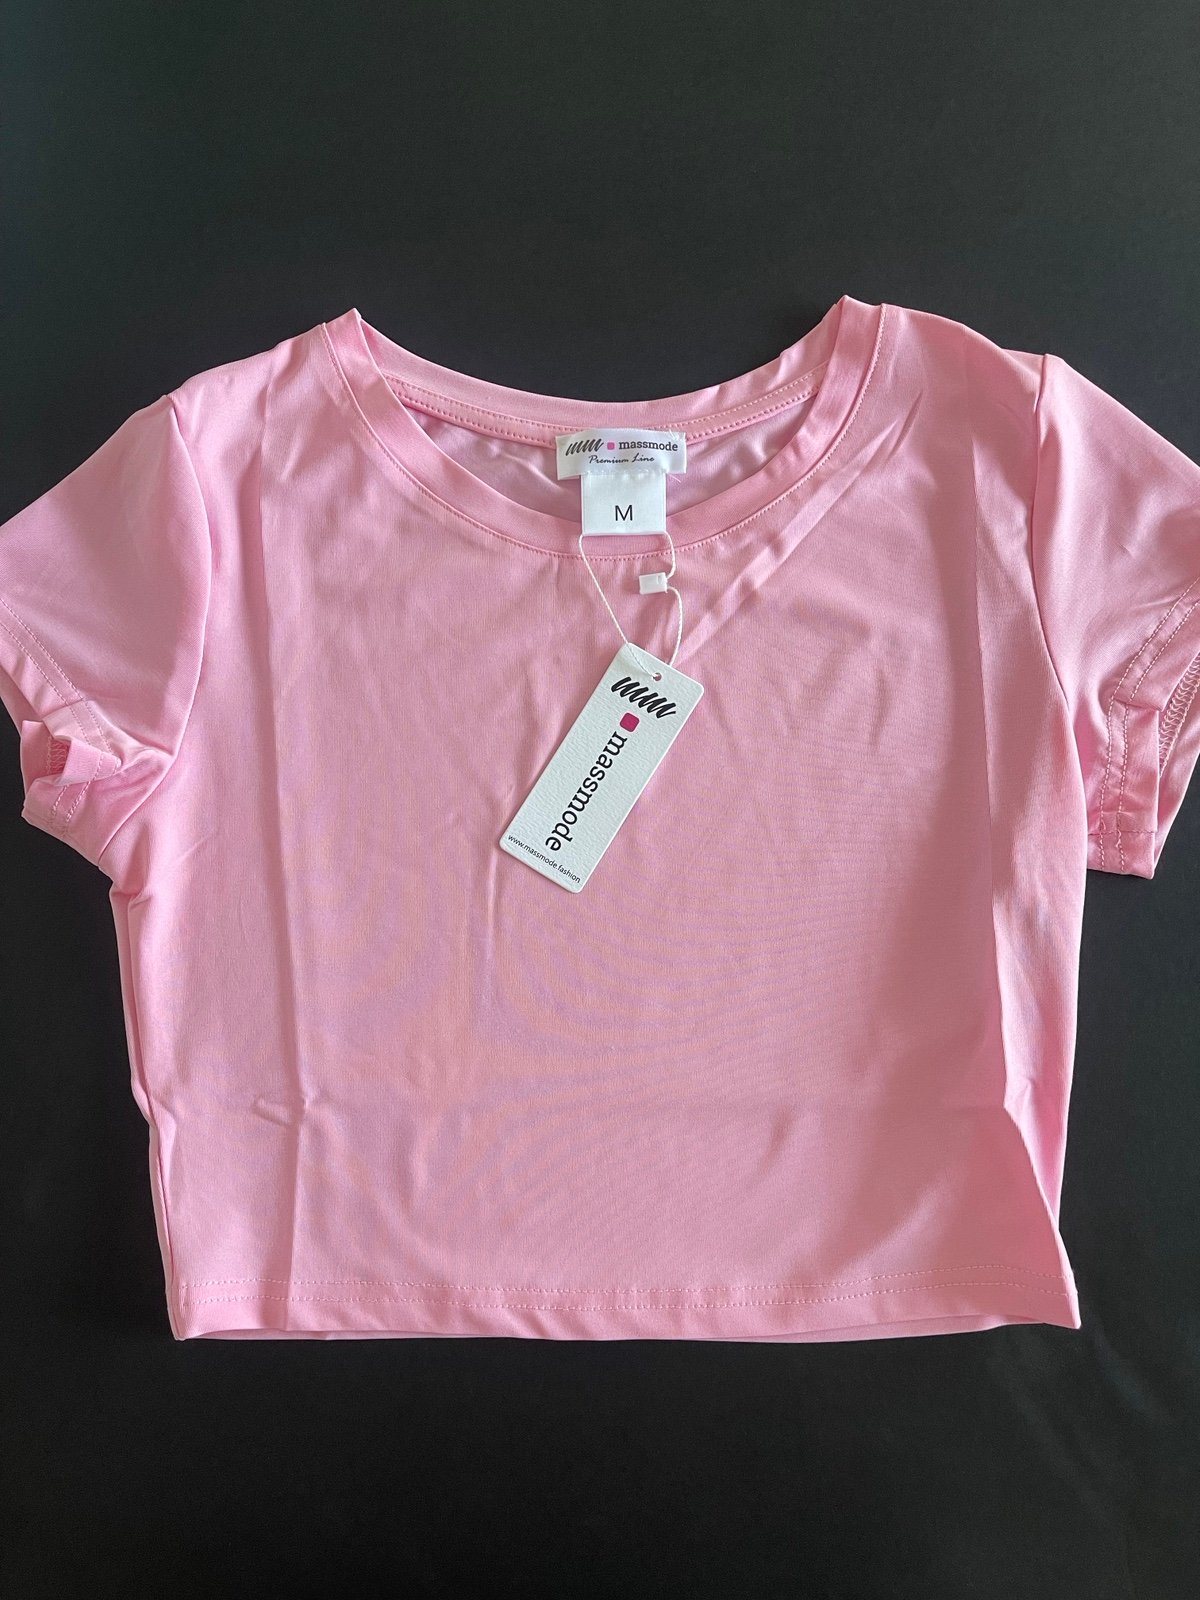 Latest  NEW PINK CROP SHIRT CUTE BARBIE SIZE SMALL MXyAGZ65y online store